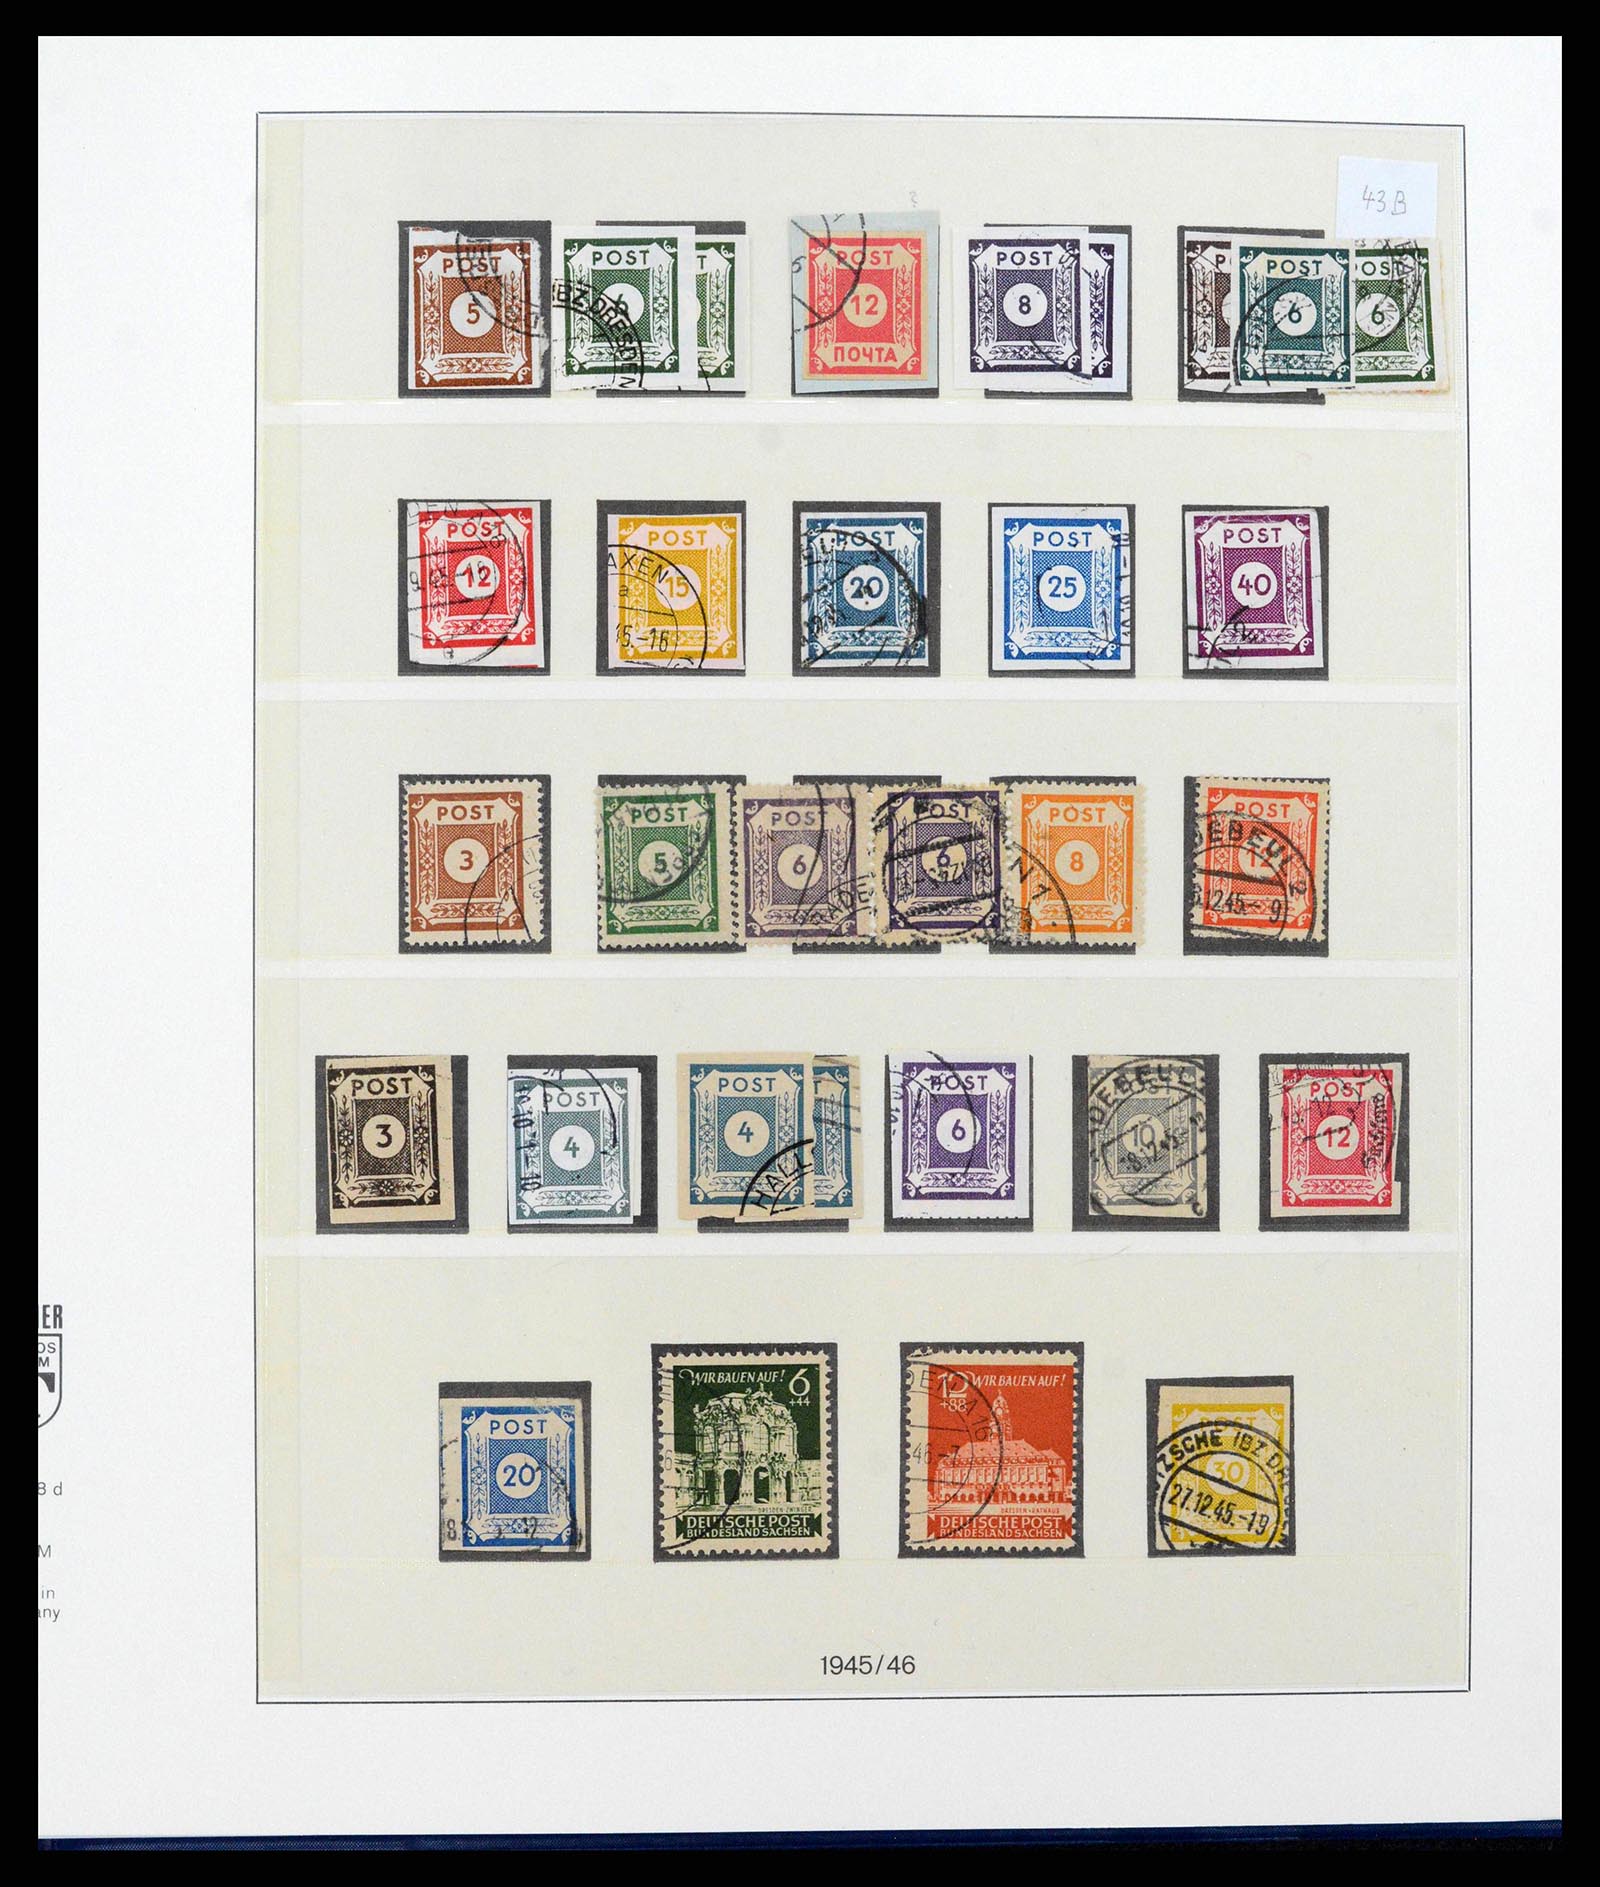 38890 0007 - Stamp collection 38890 Germany sovjet zone 1945-1949.